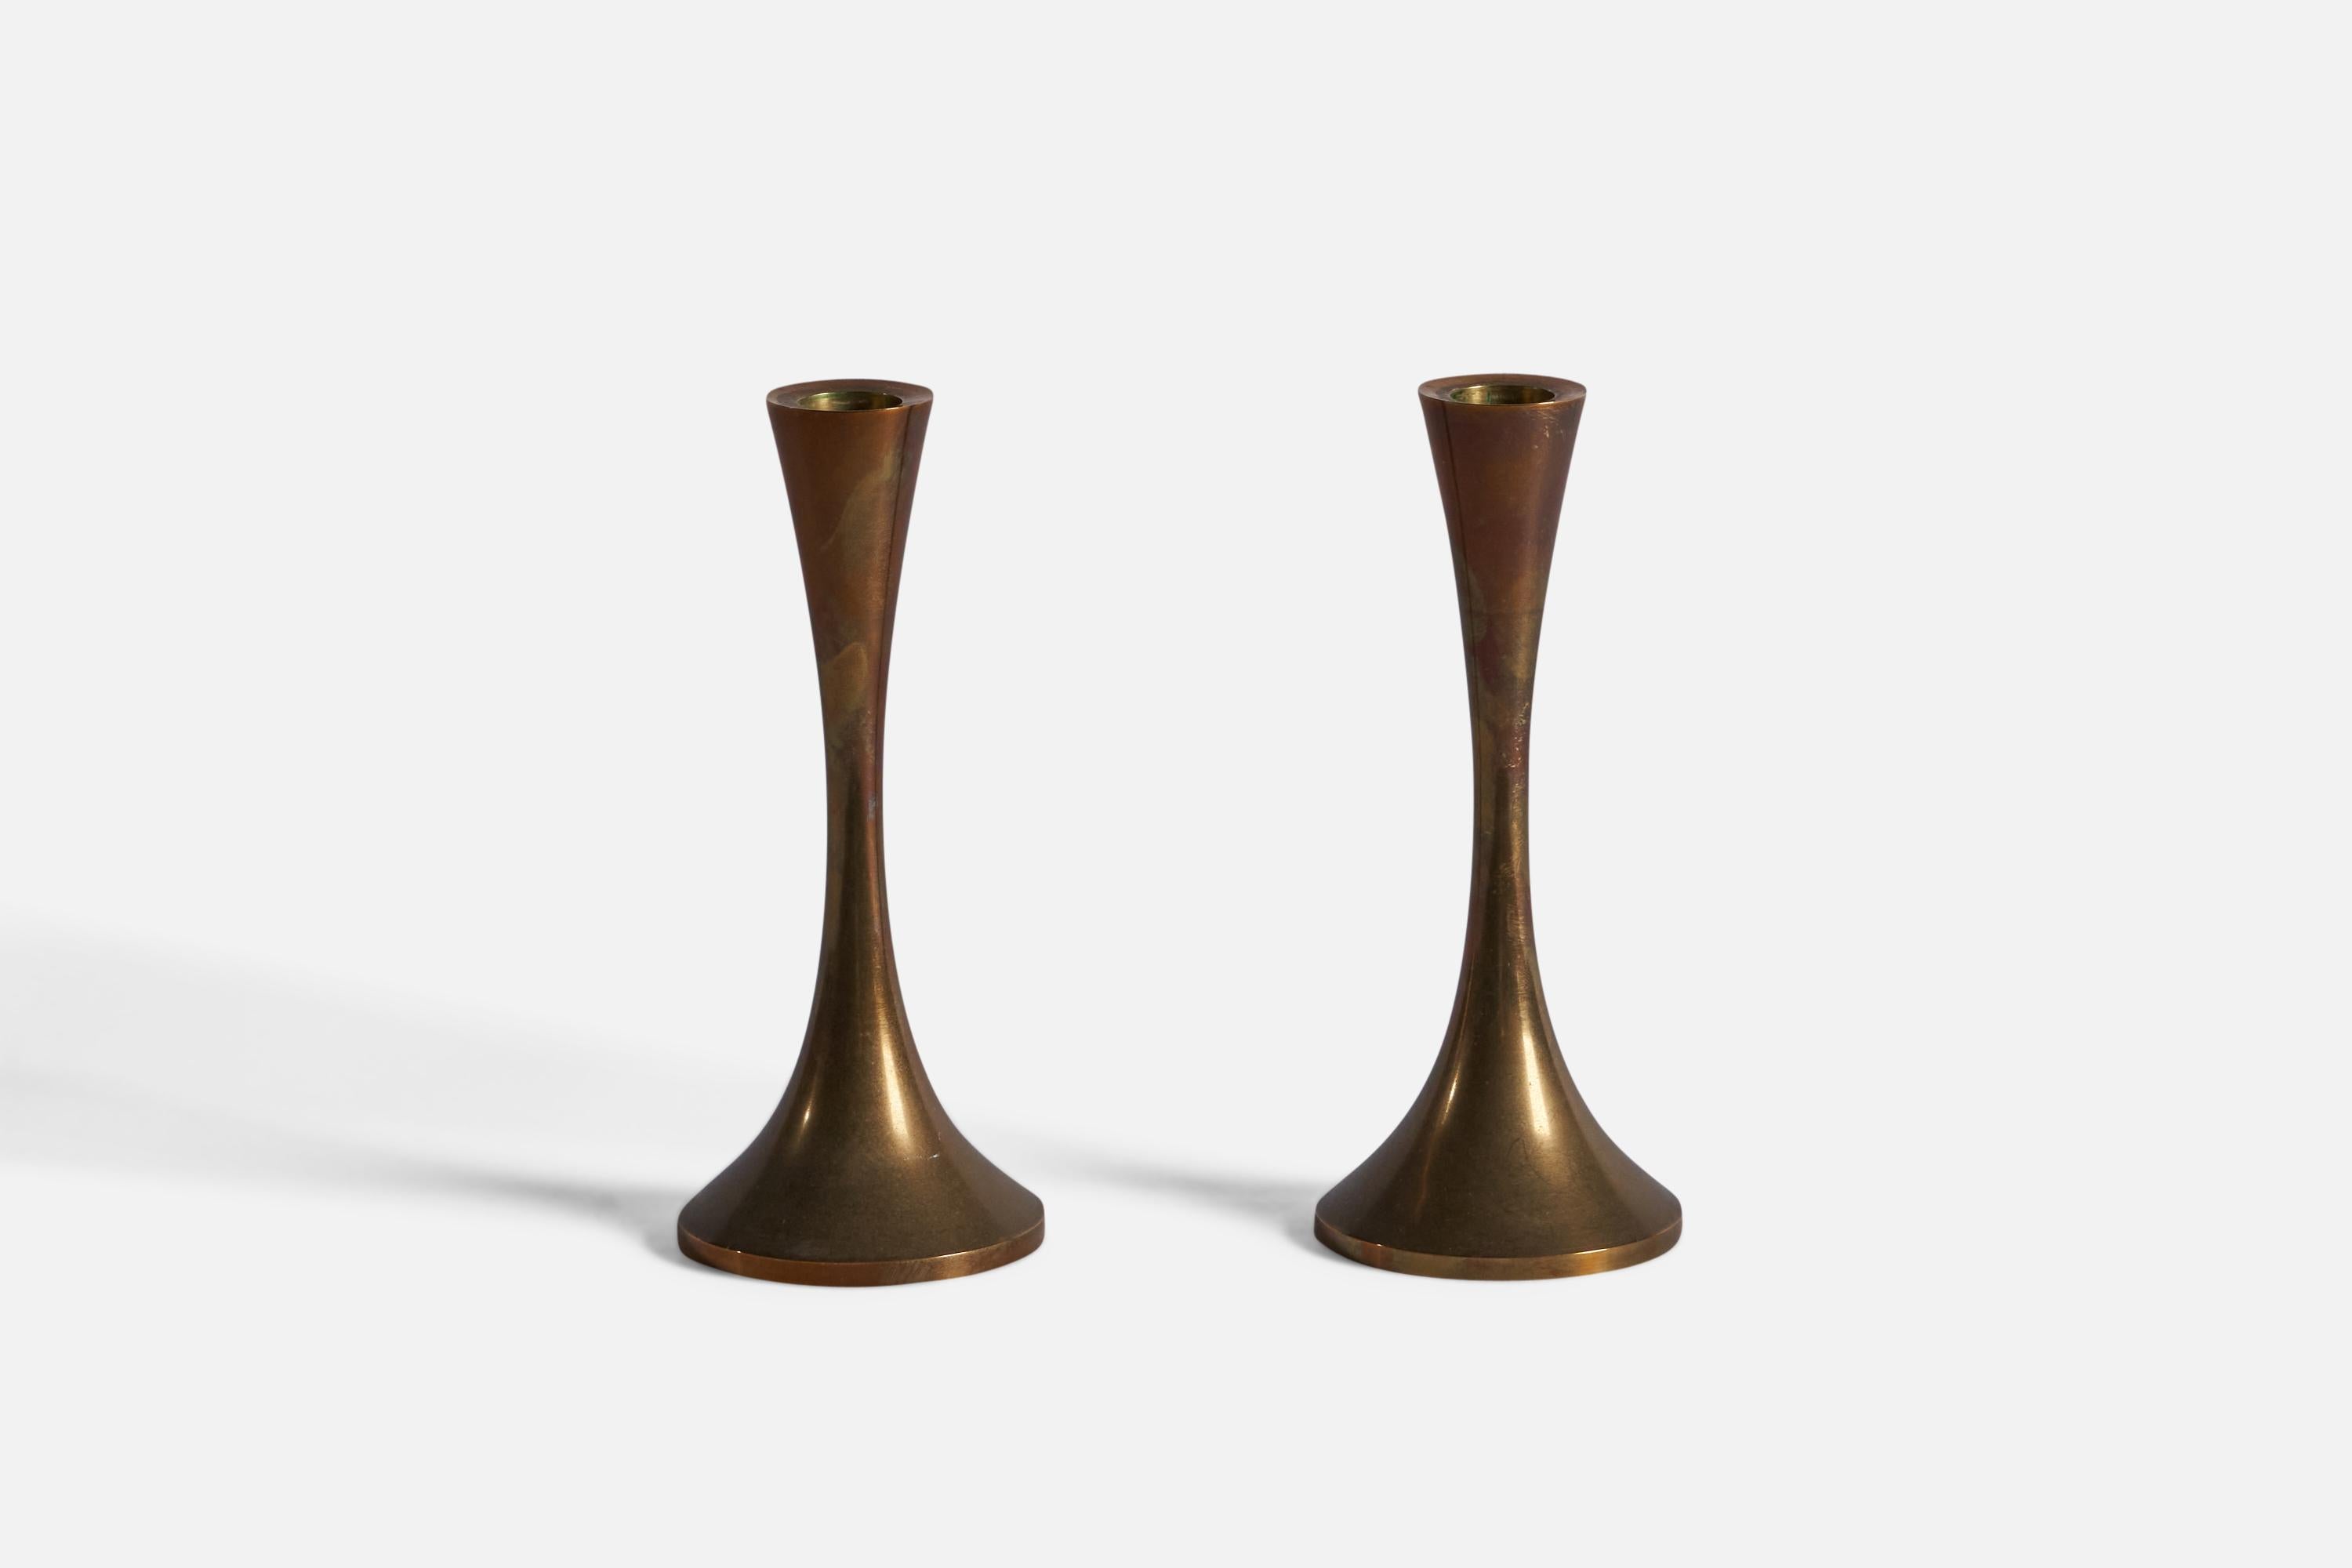 A pair of brass candle sticks designed and produced in Denmark, 1950s.

Fits 0.7